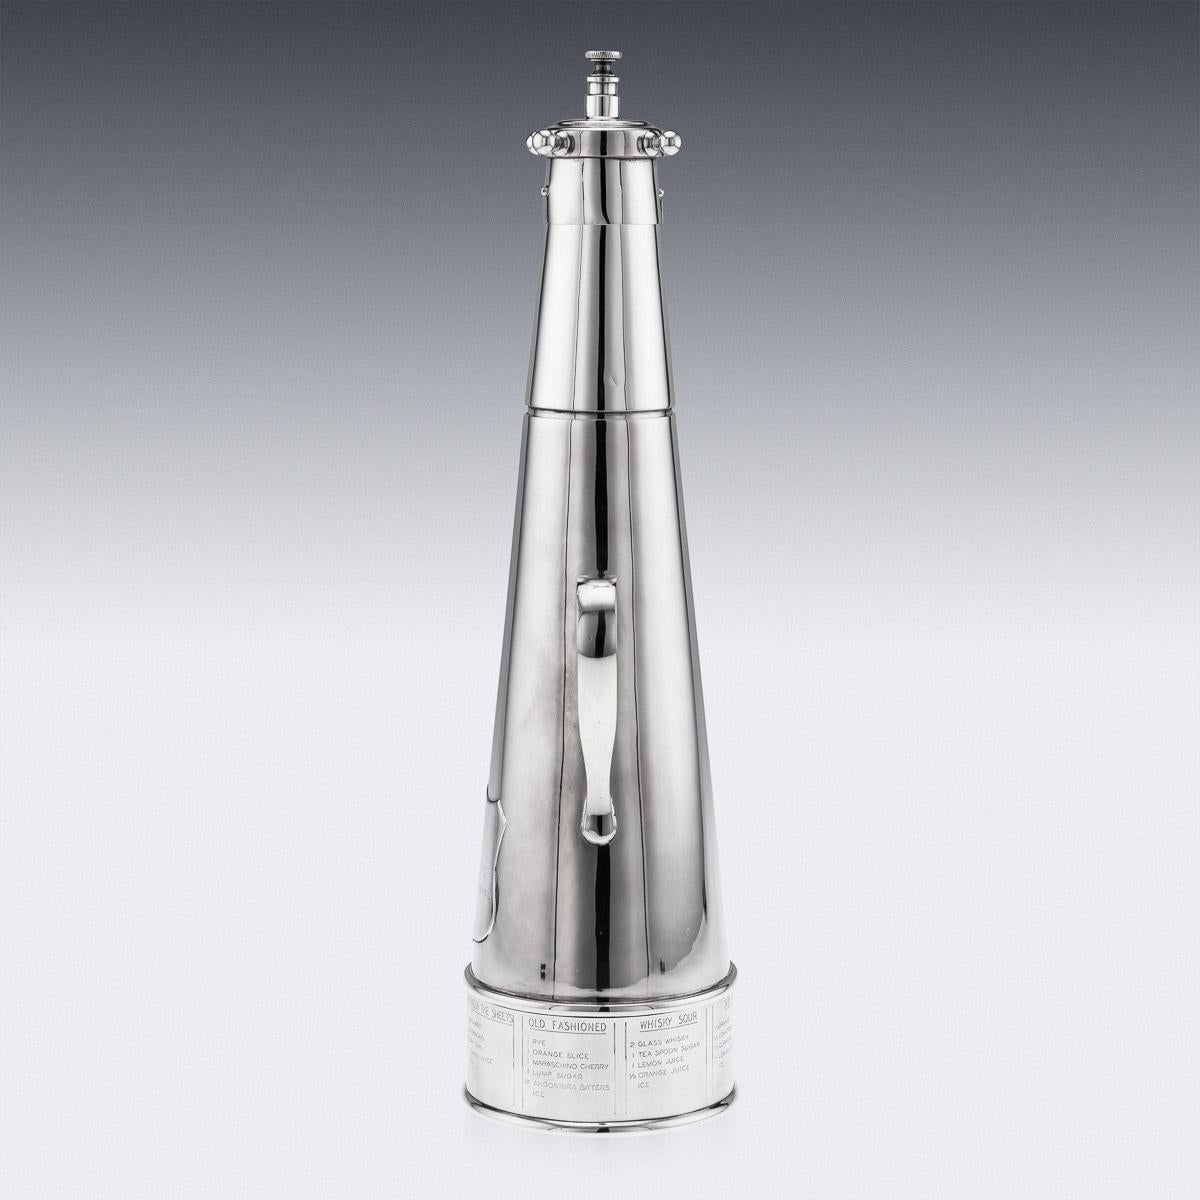 Art Deco 'The Thirst Extinguisher' Silver Plated Cocktail Shaker, Asprey & Co, c.1930